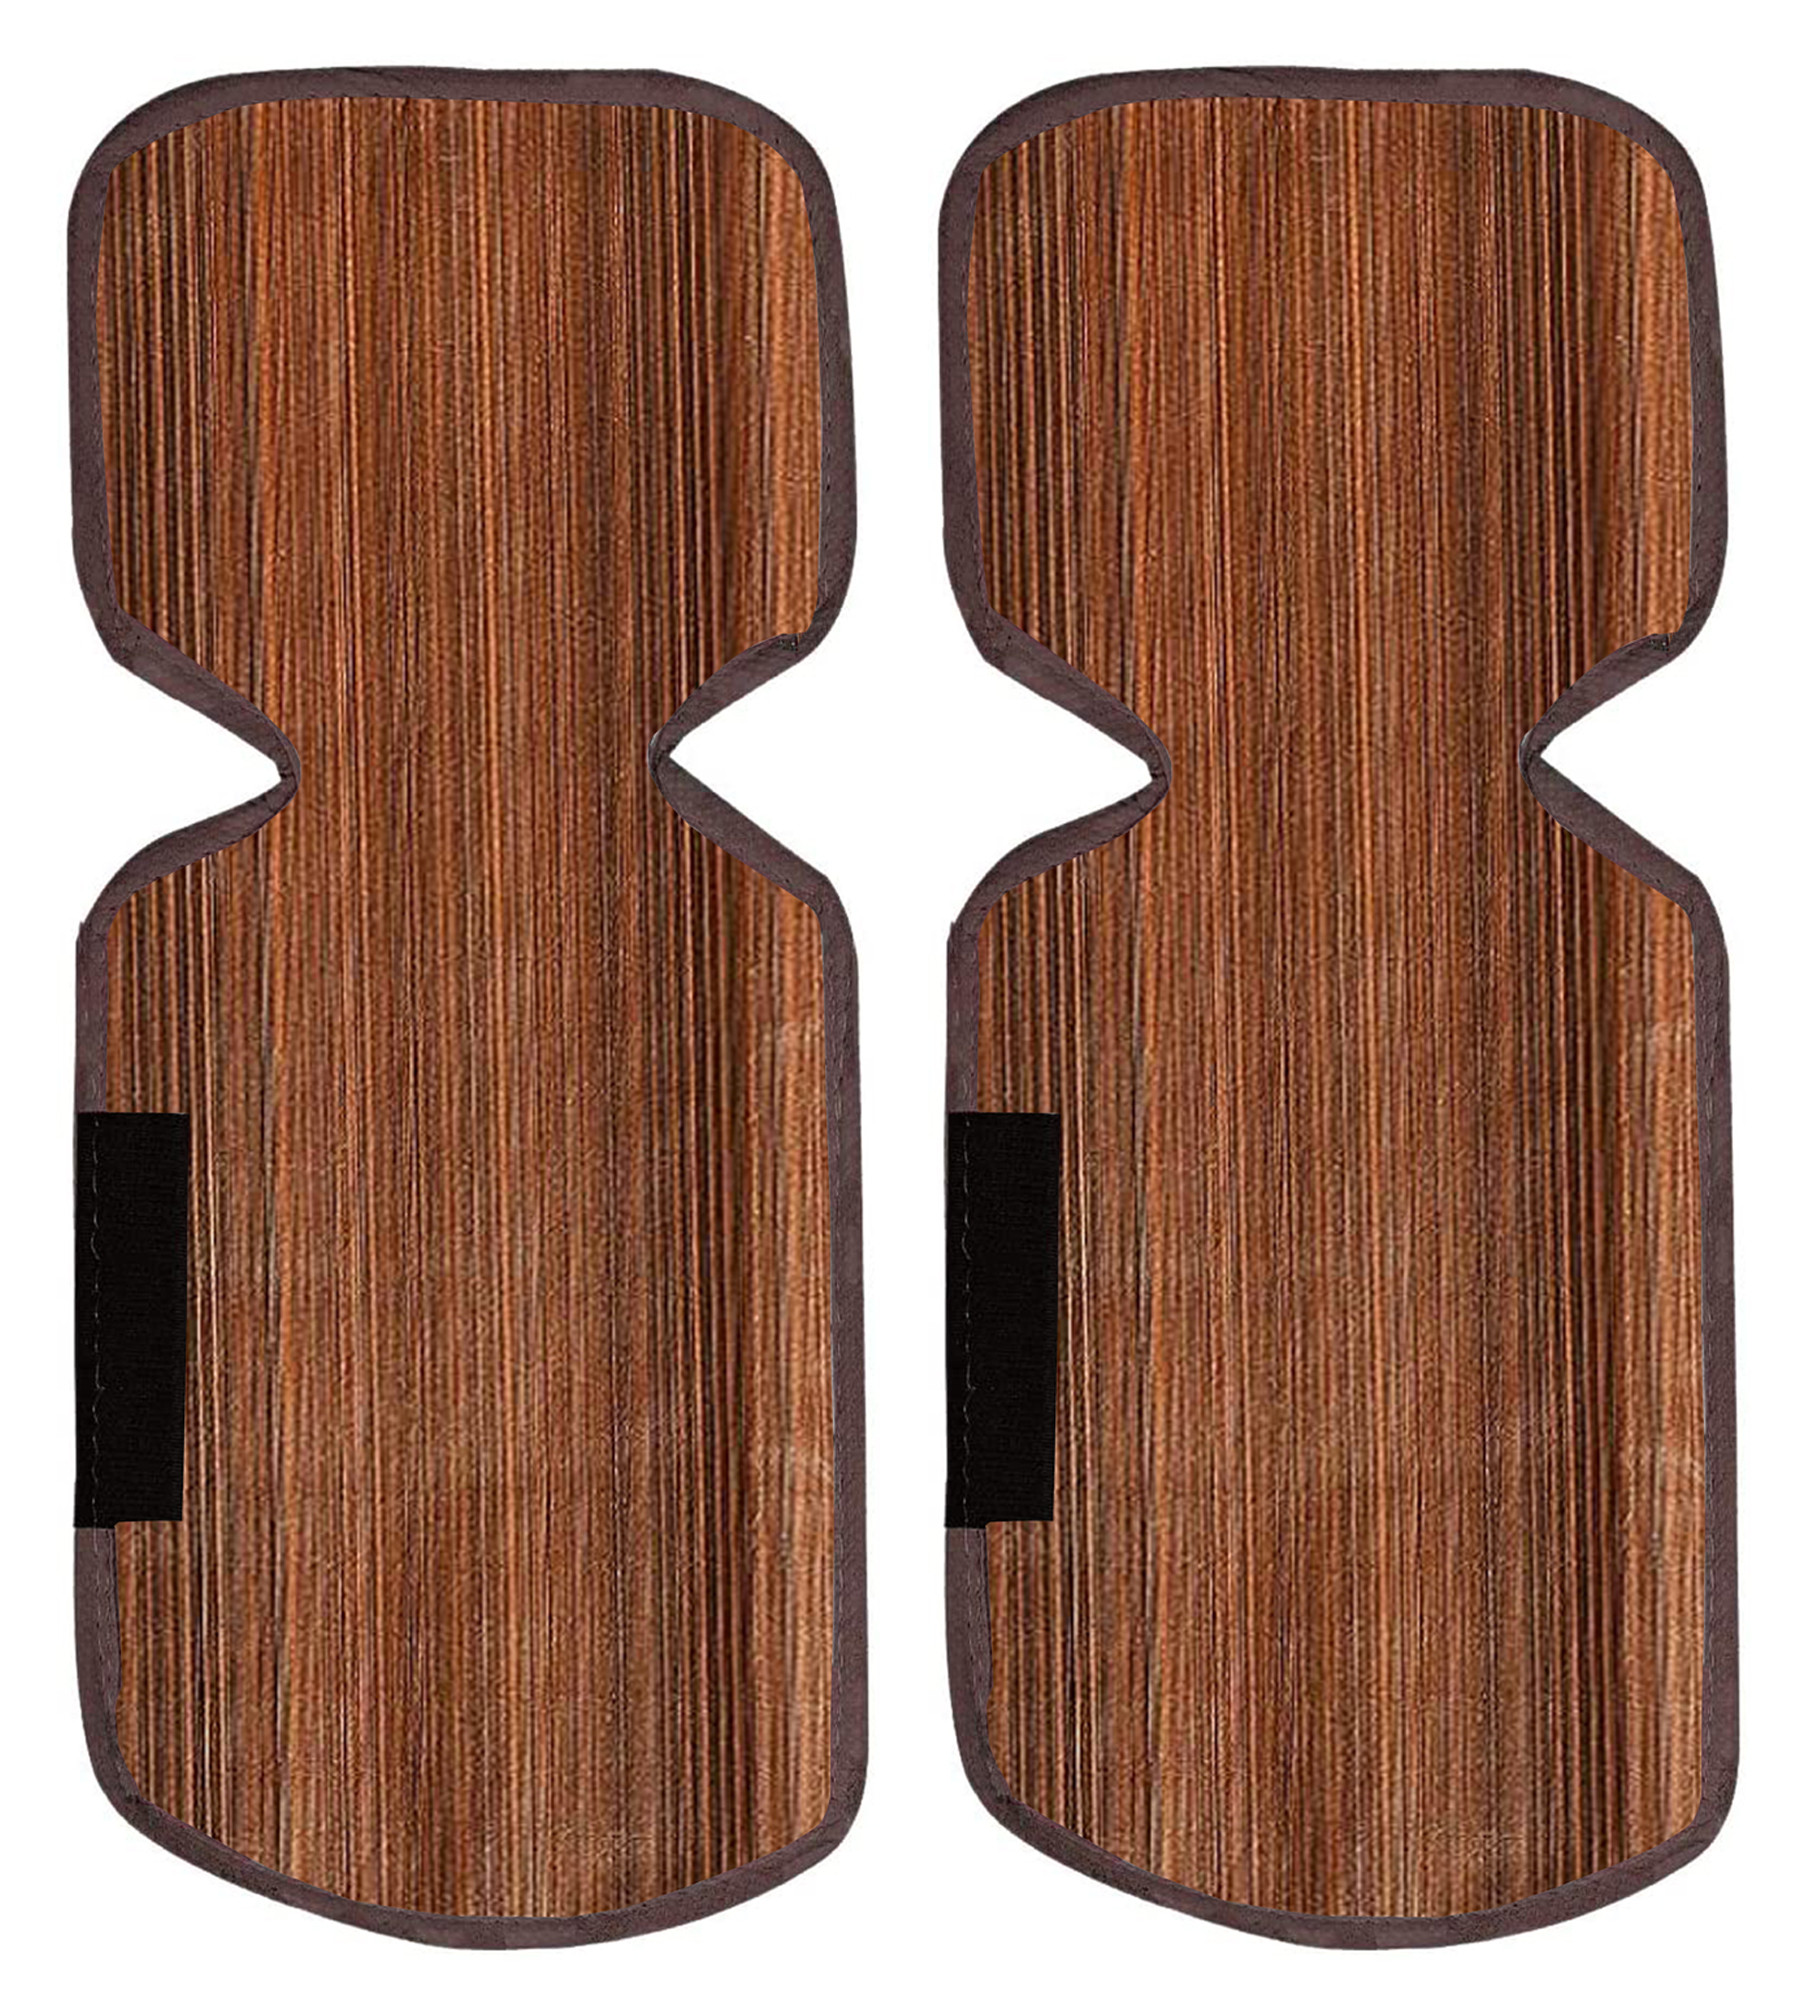 Kuber Industries Refrigerator Door Handle Covers,Keep Your Kitchen Appliance Clean from Smudges, Fingertips, Drips, Food Stains, Perfect for Dishwashers,Set of 2,Lining,Brown